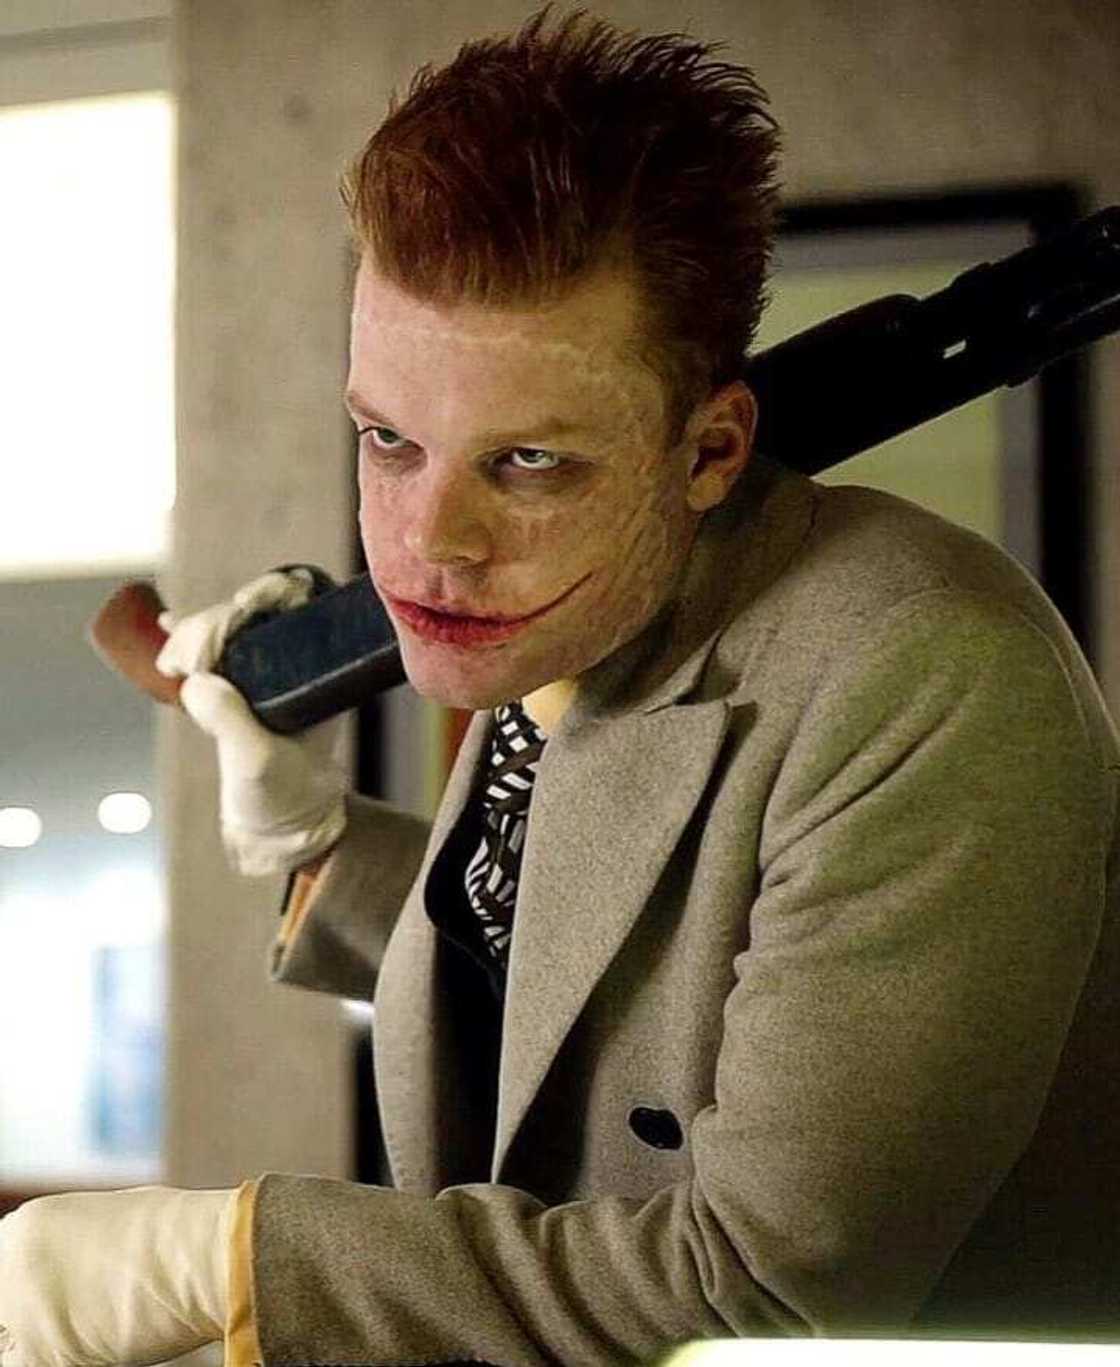 Cameron Monaghan movies and TV shows